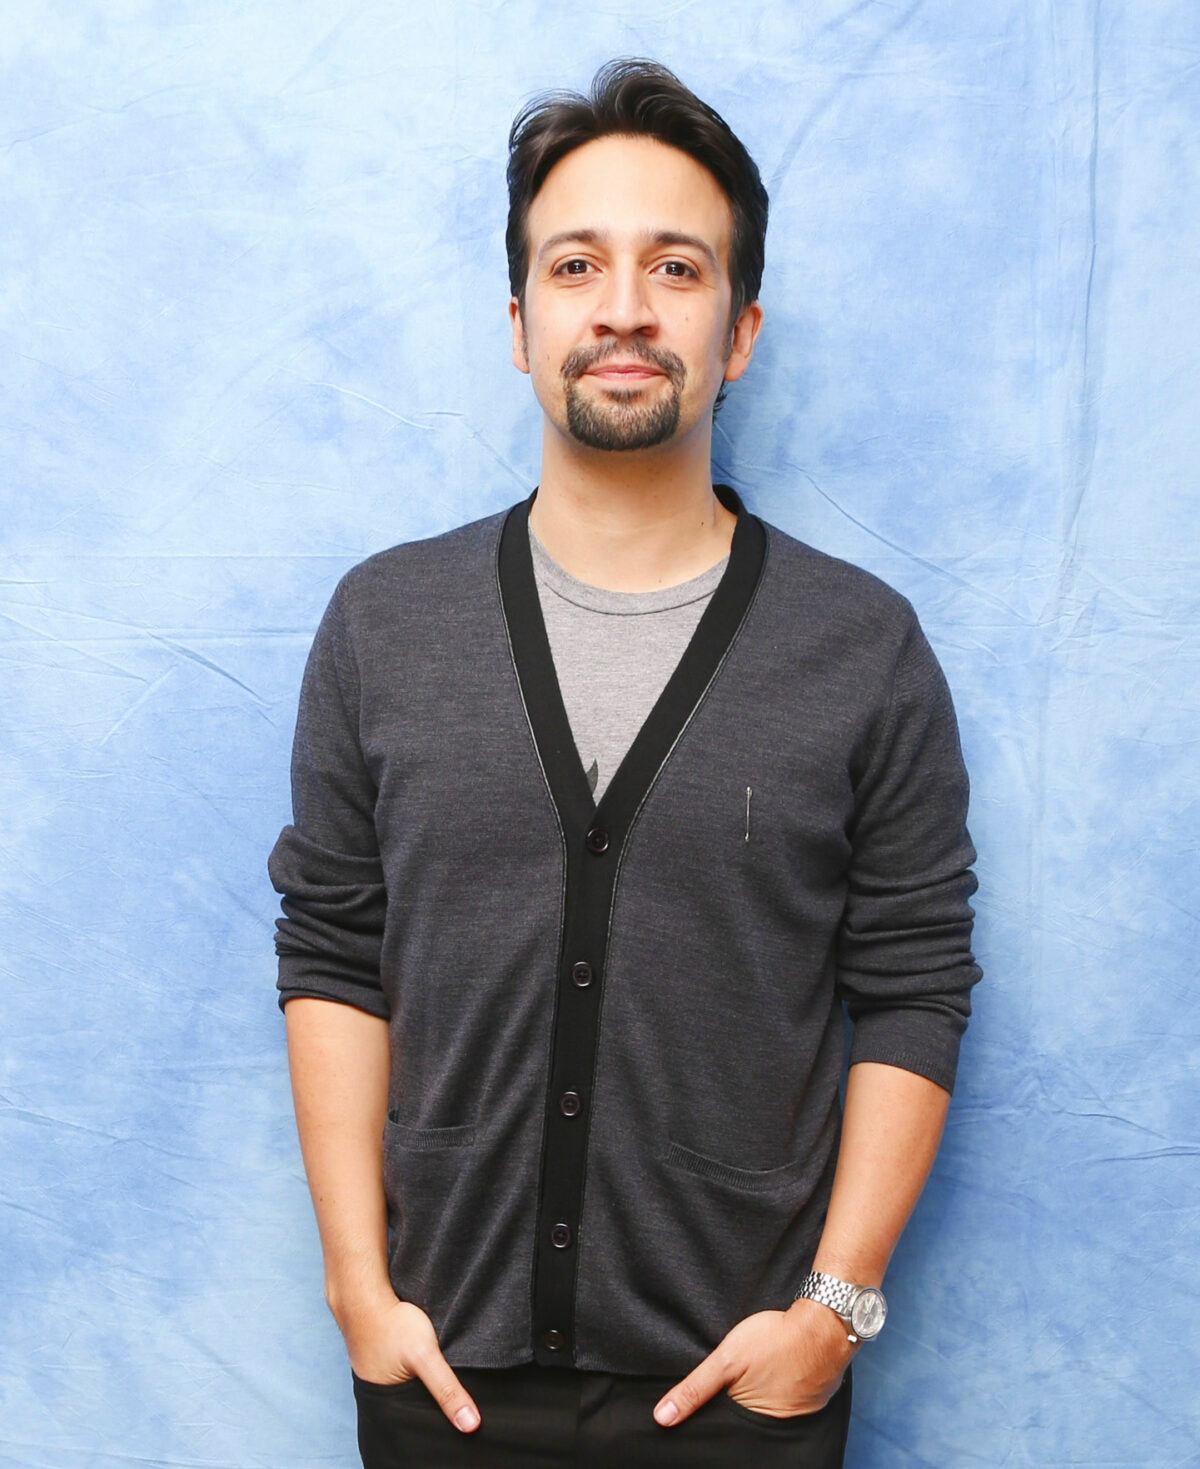 In this picture, the genius award winning Lin Manuel-Miranda stands relaxed, his hands in his pockets, wearing a cardigan in front of a blue backdrop.